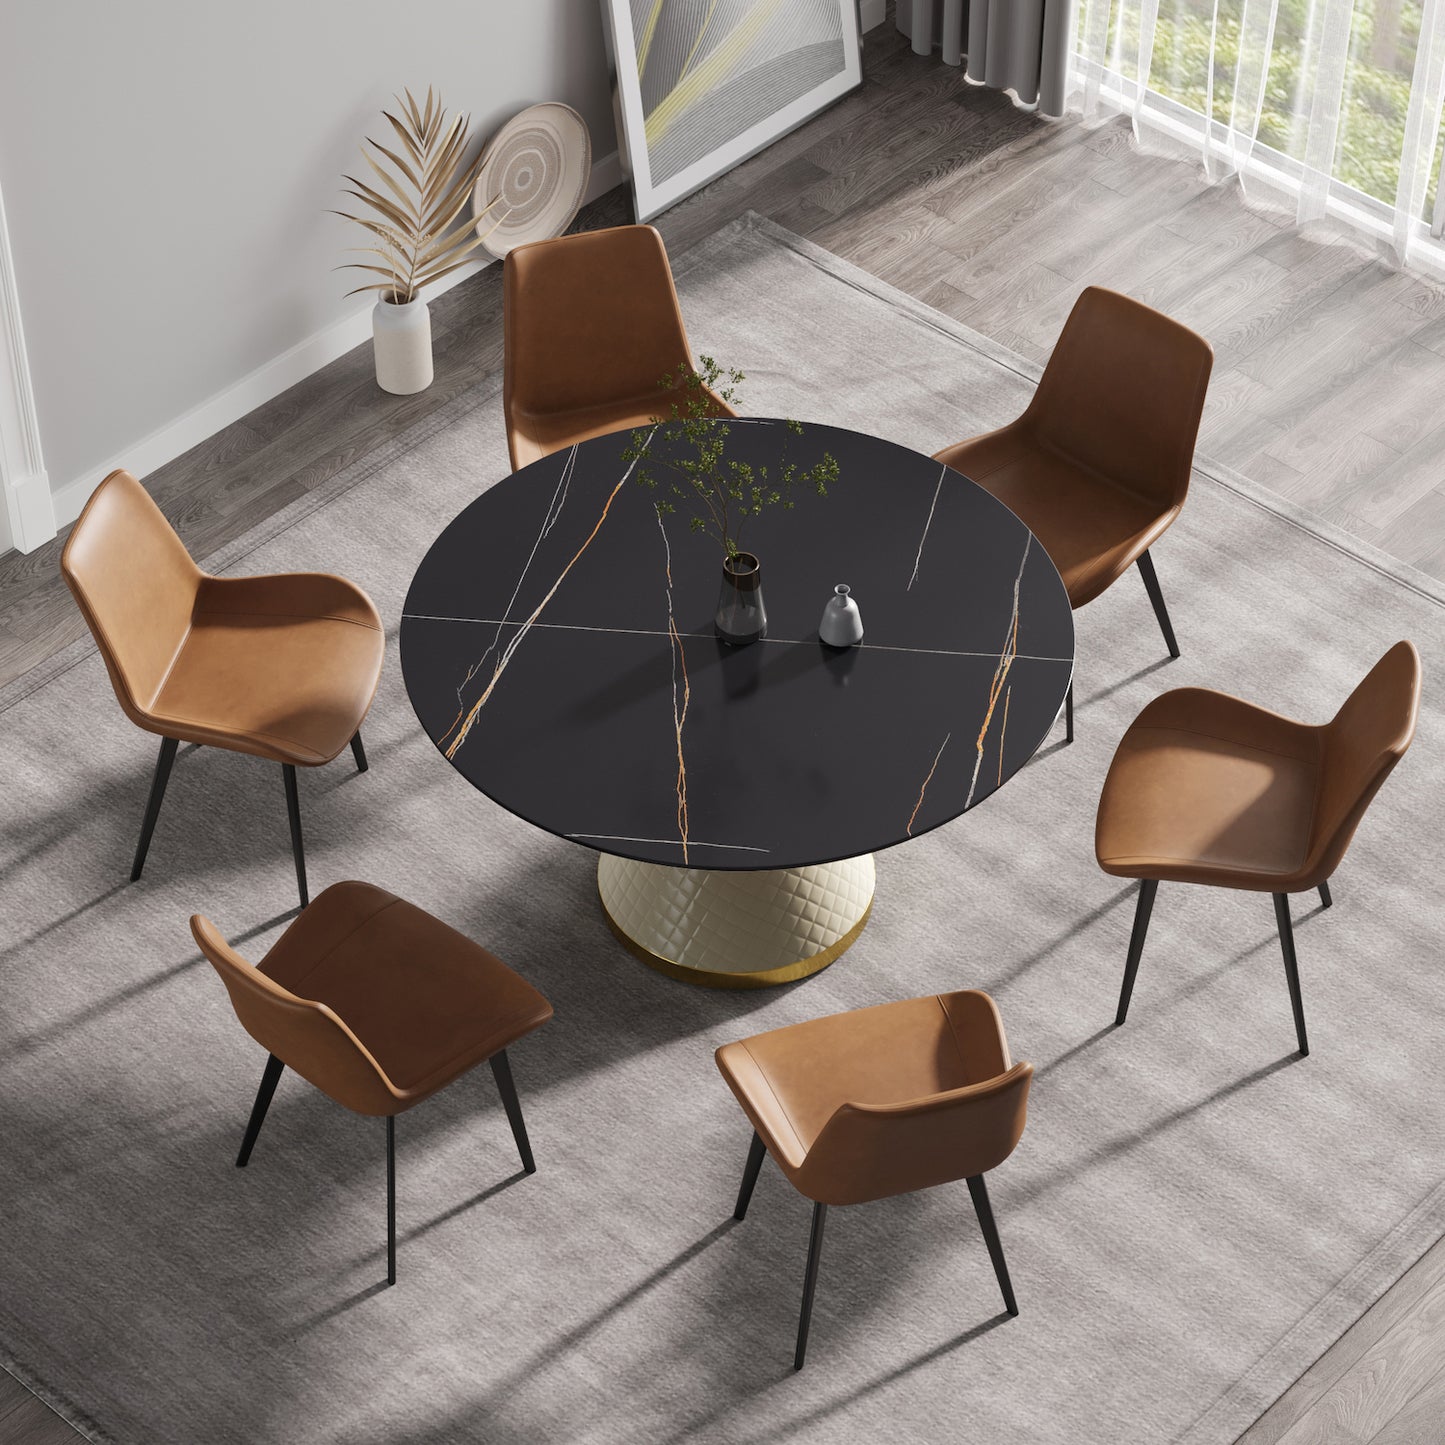 Atunus Modern 53" Sintered Stone Dining Table with Carbon Steel Base